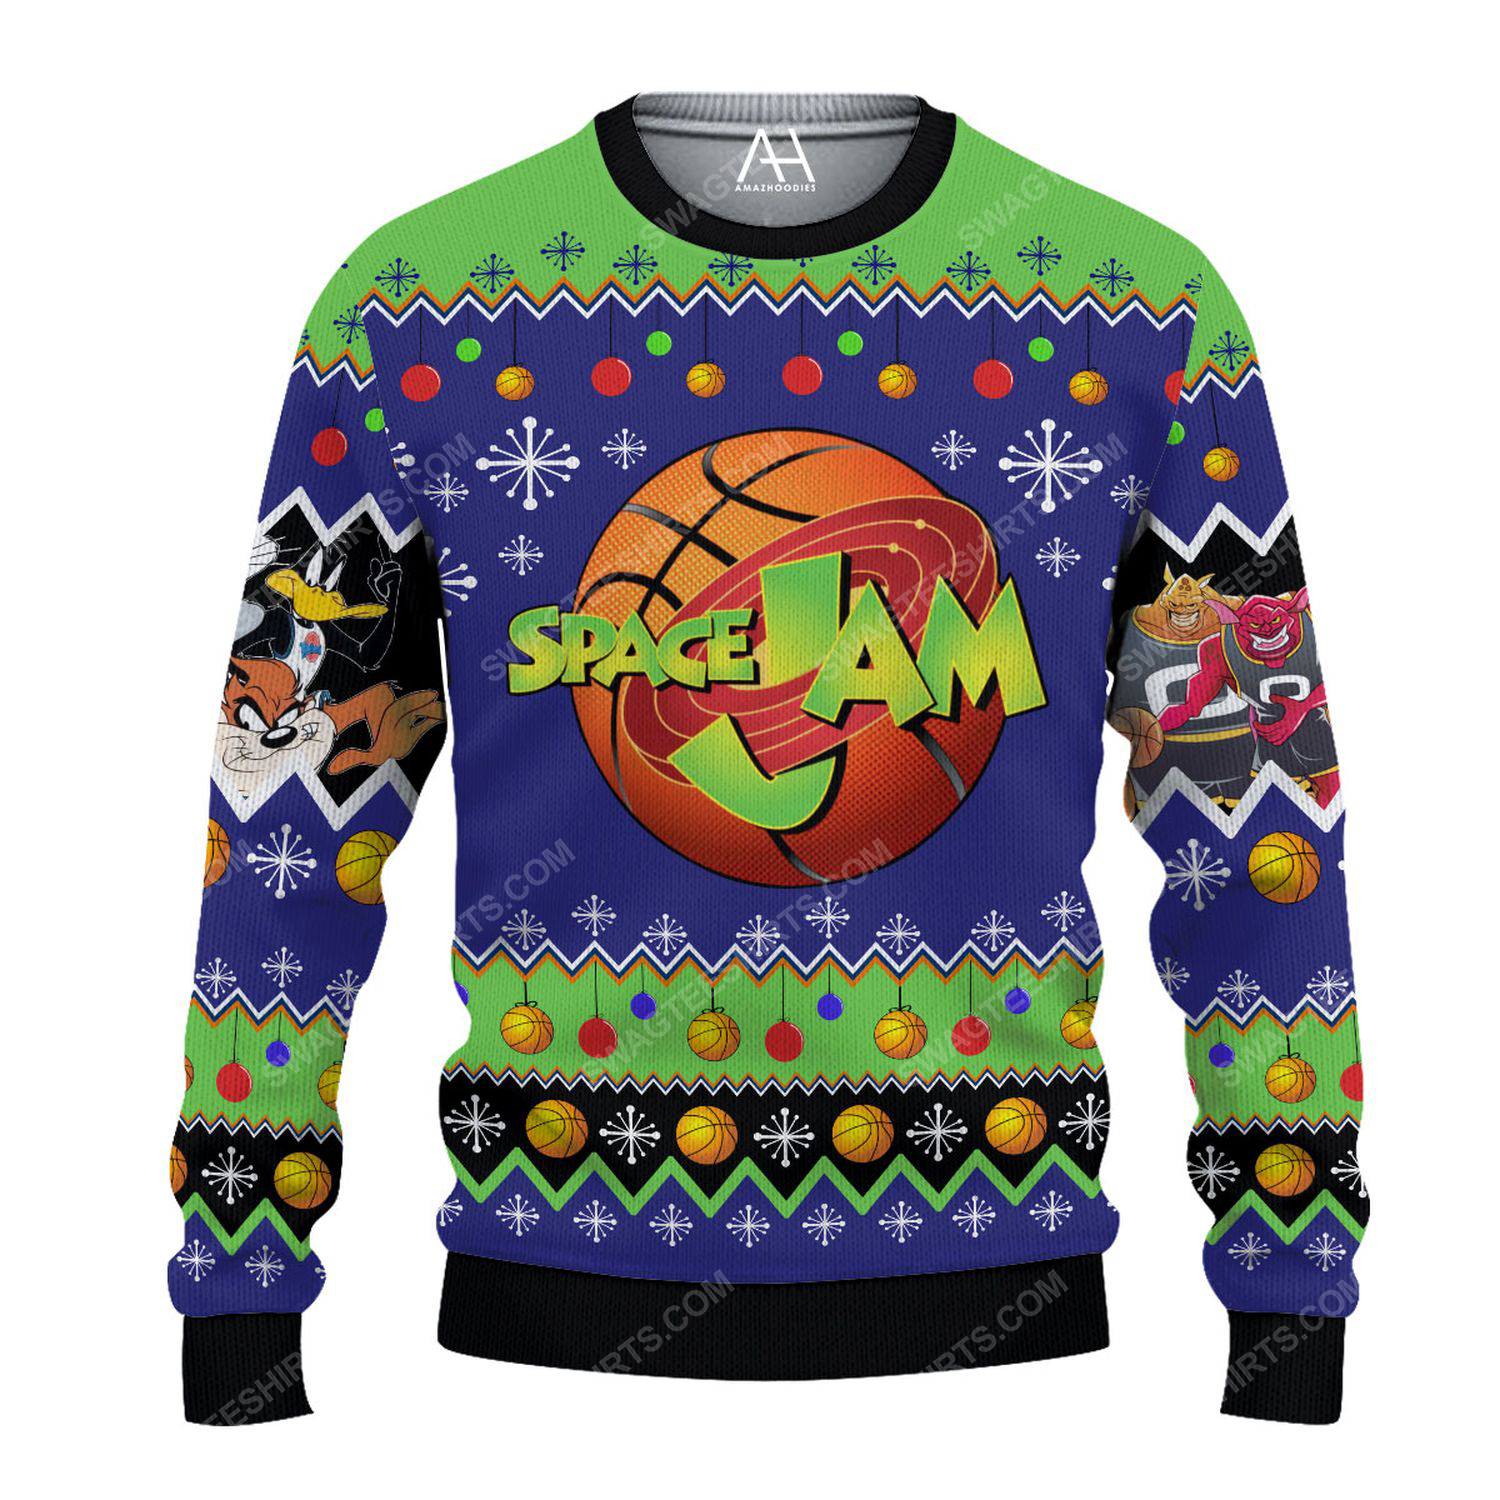 Space jam pattern ugly christmas sweater 1 - Copy (3)